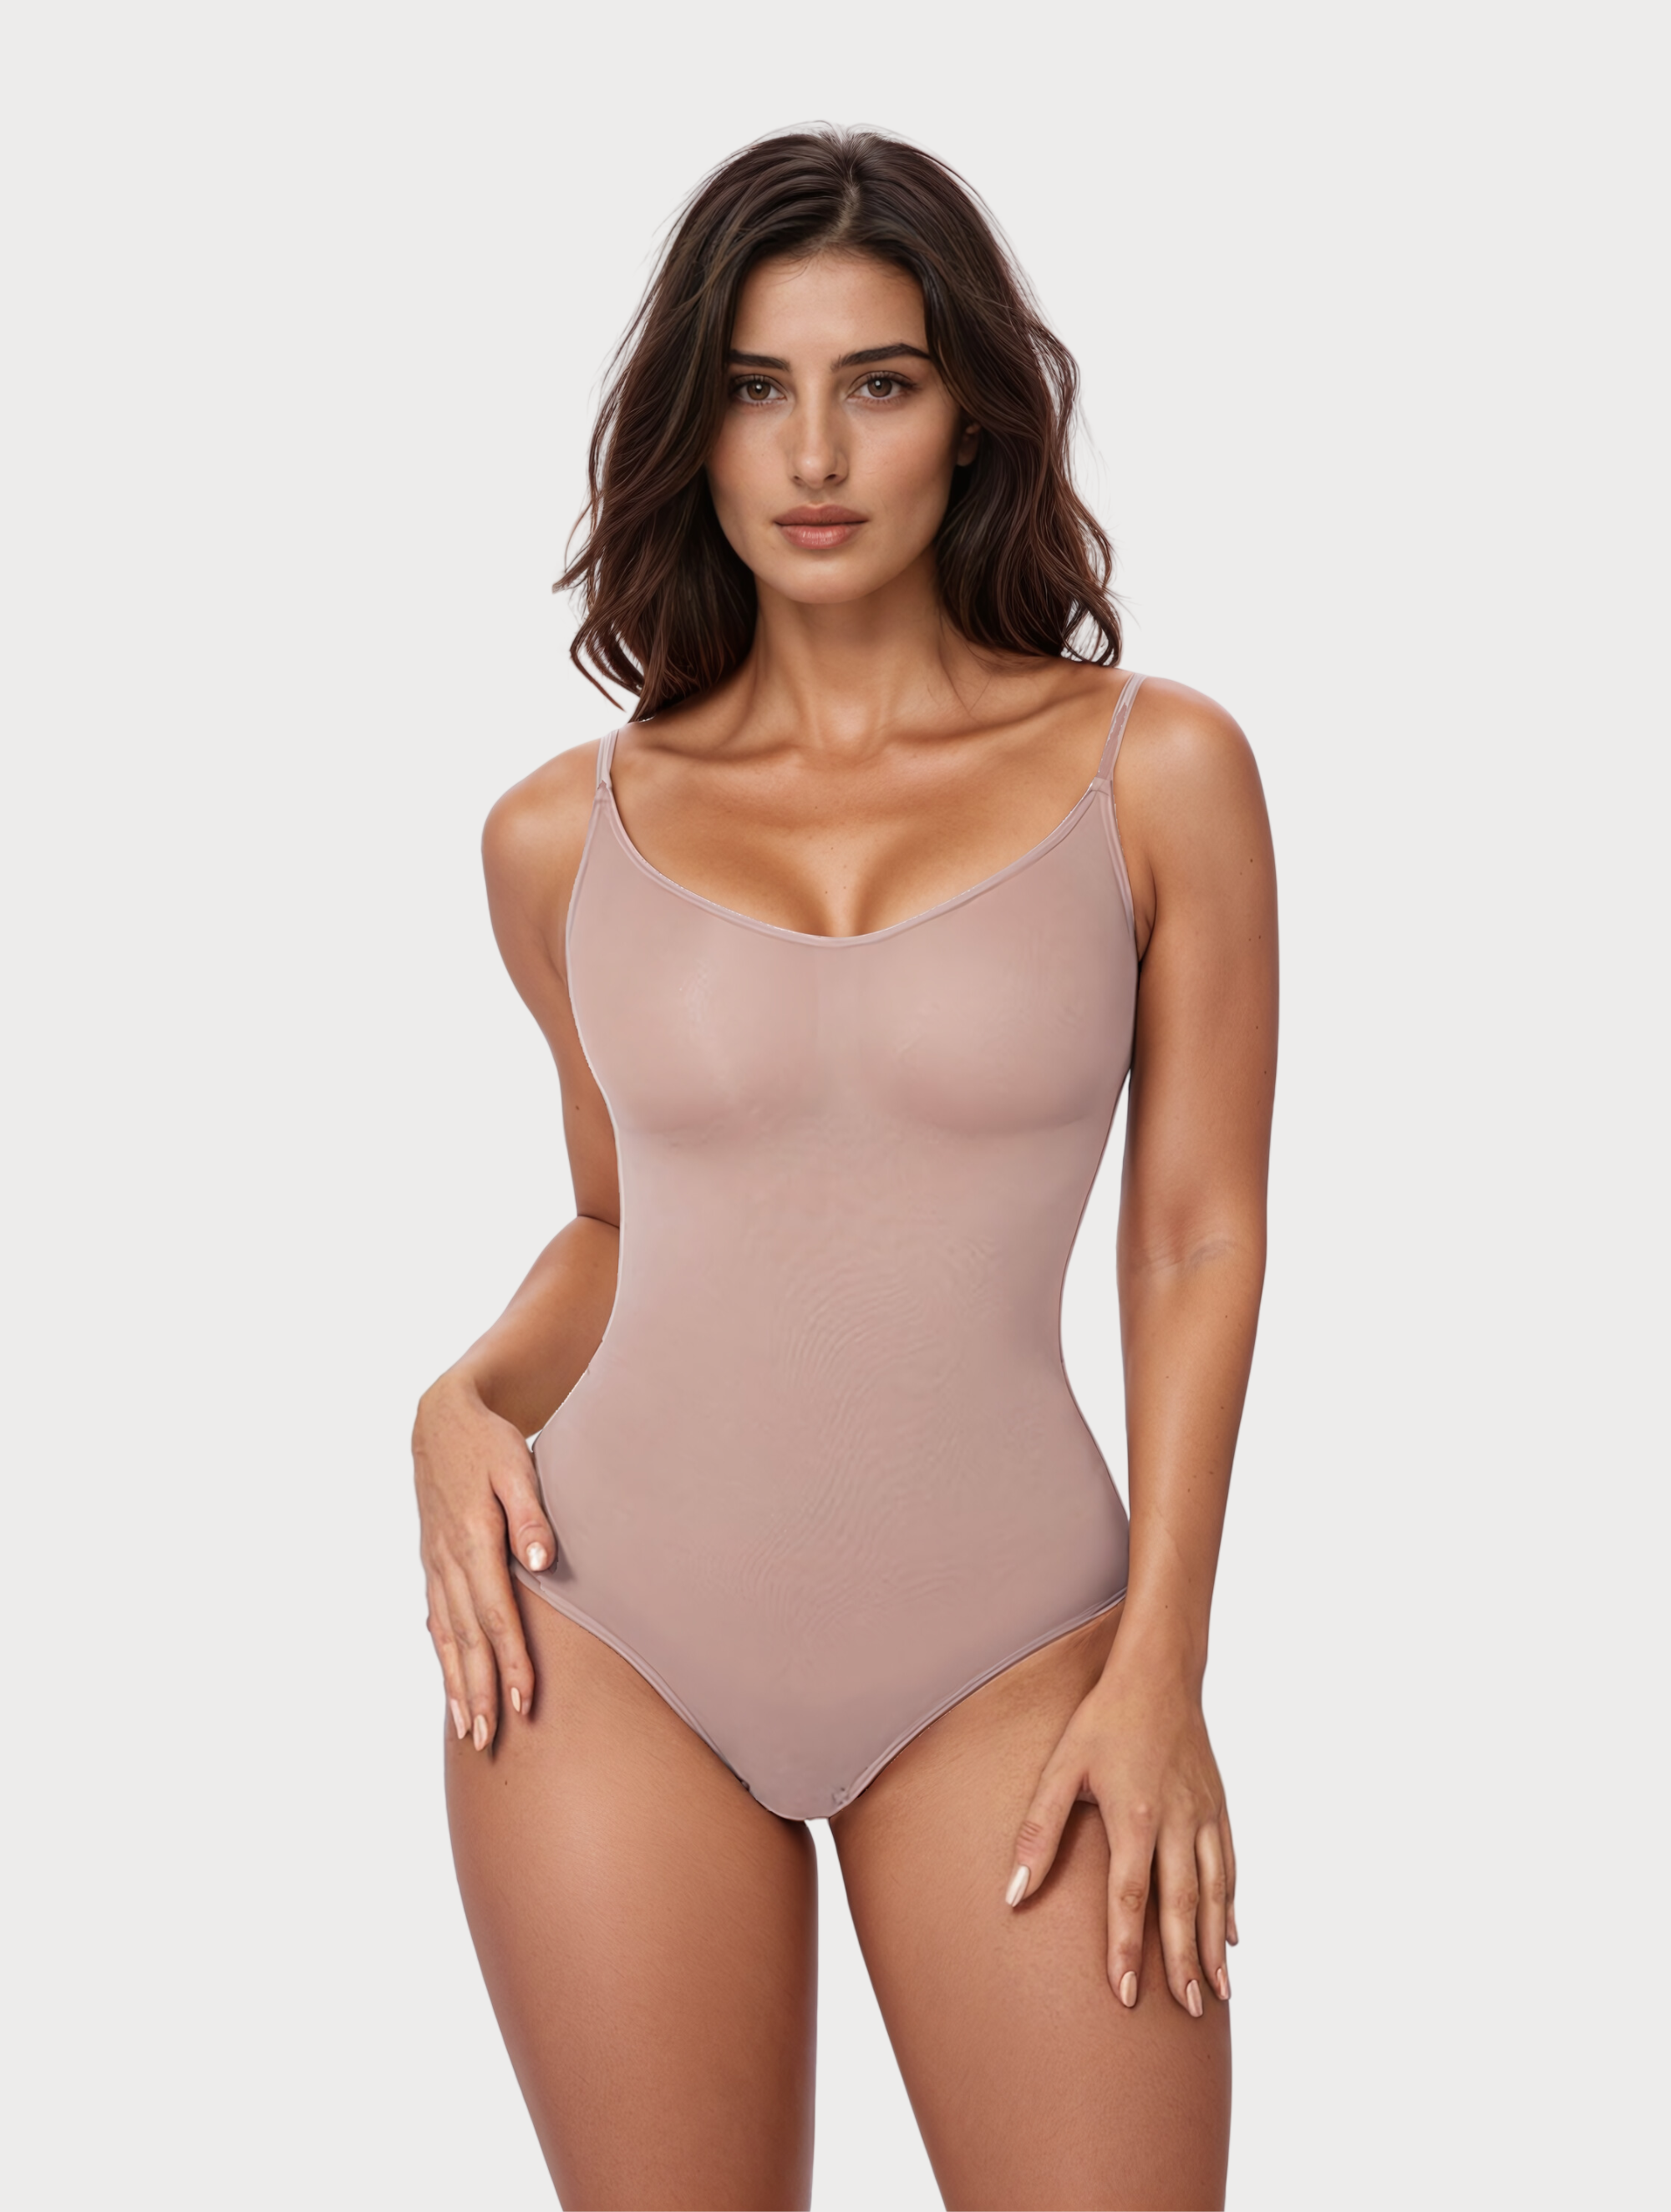  Shapewear Traceless U Shaped Beauty Back Mesh Fabric Patchwork  Receiving Belly Buttock Lifting Bodysuit Body (Beige, M) : Sports & Outdoors